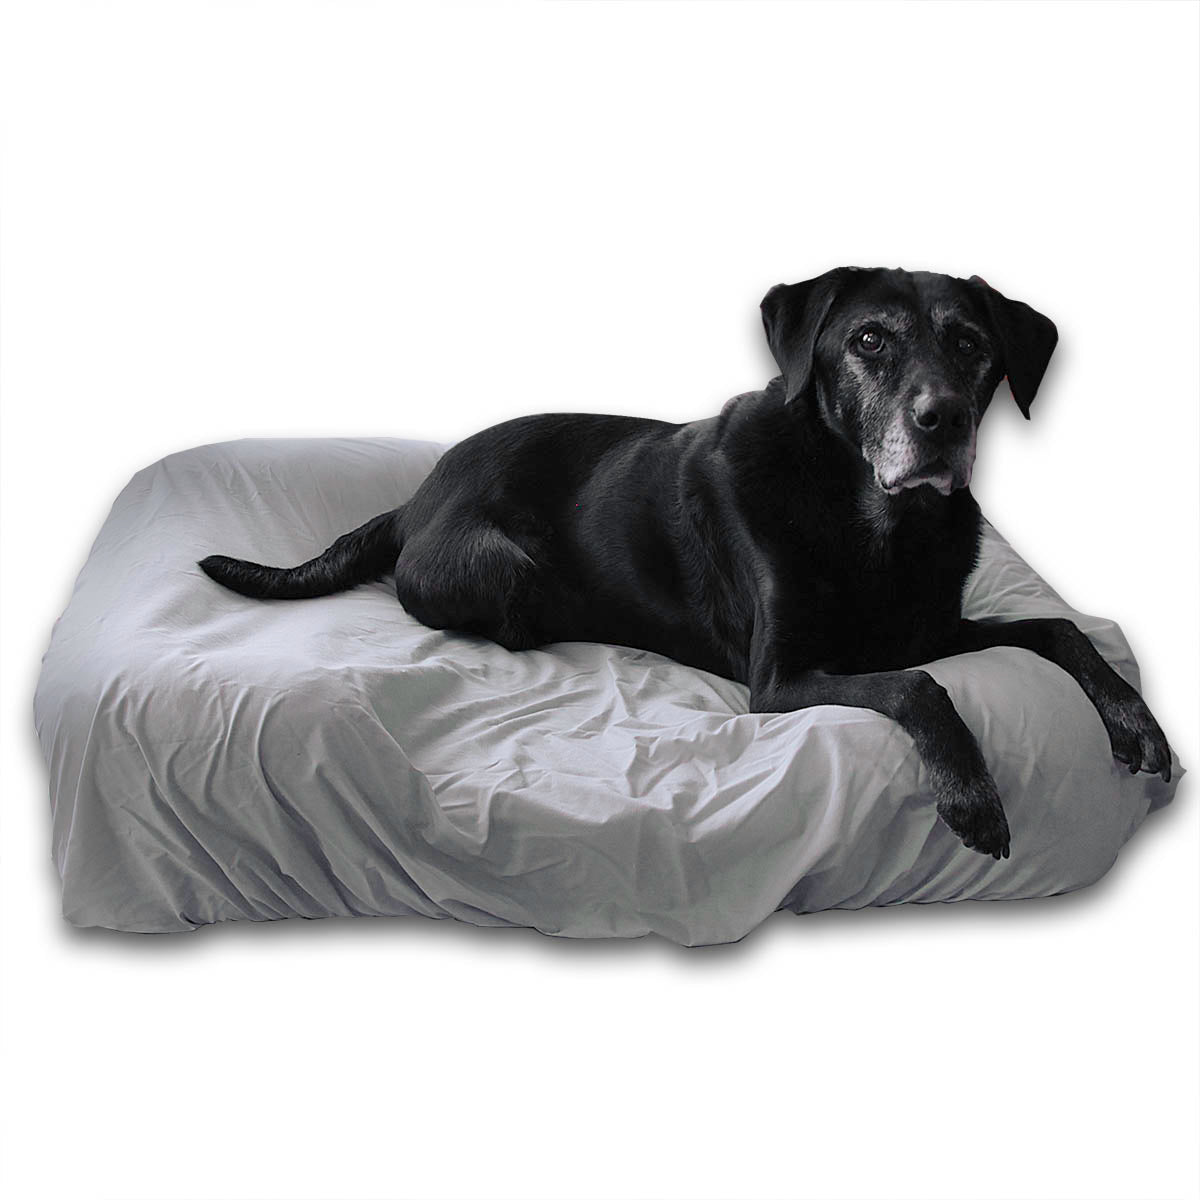 PawSheets® Special Offers - Discounted Items